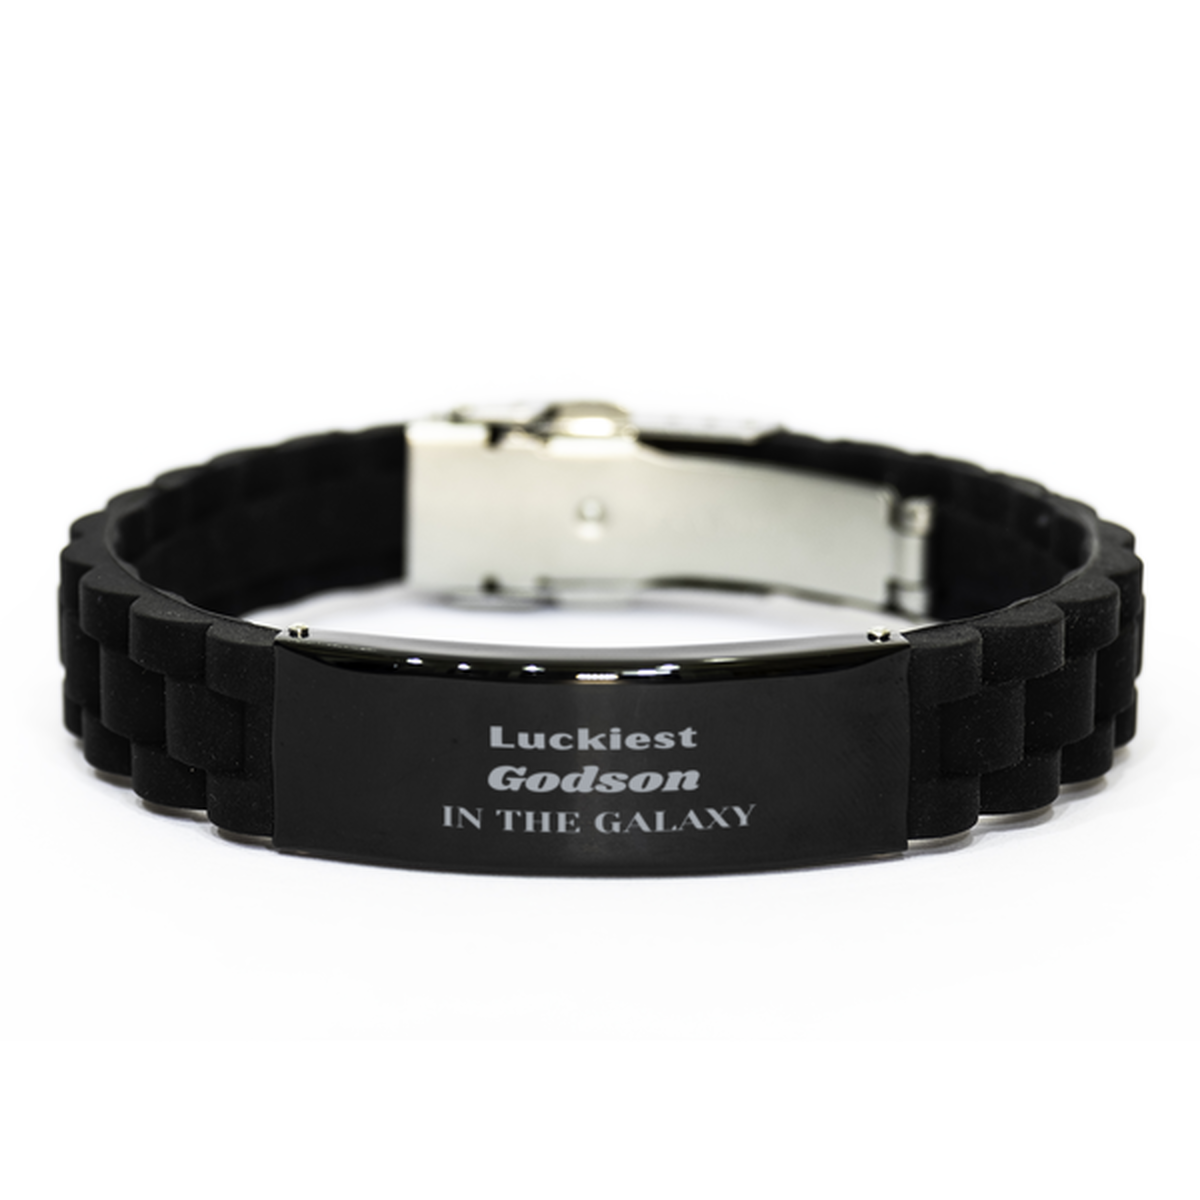 Luckiest Godson in the Galaxy, To My Godson Engraved Gifts, Christmas Godson Black Glidelock Clasp Bracelet Gifts, X-mas Birthday Unique Gifts For Godson Men Women